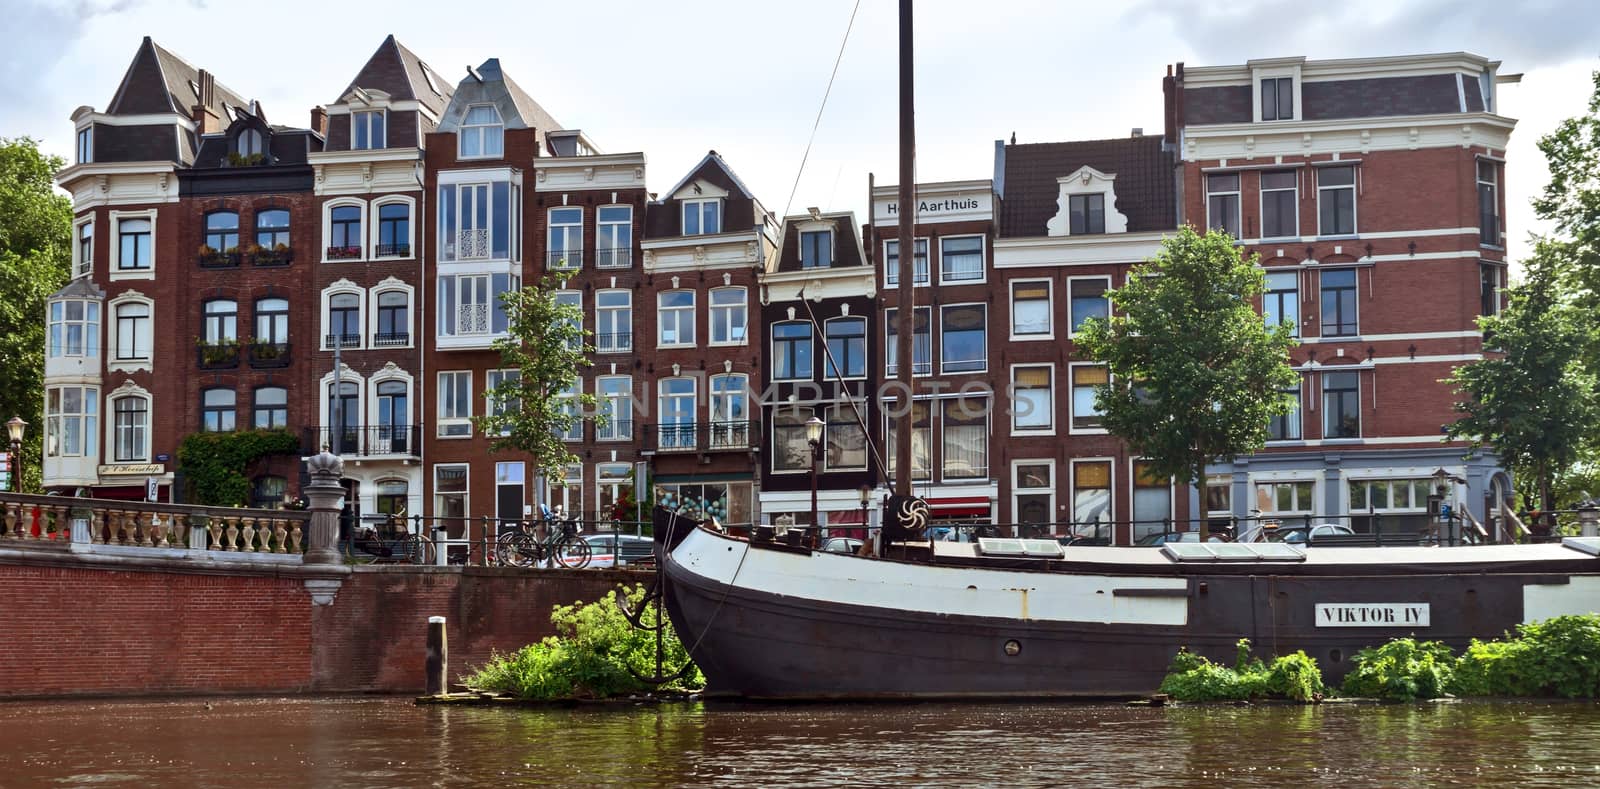 AMSTERDAM, NETHERLANDS - MAY 30: Amsterdam canals on May 30, 2014 in Amsterdam, Netherlands. View of Amsterdam canals and typical dutch houses.

Amsterdam, Netherlands - May 30, 2014: View of Amsterdam canals and typical dutch houses.